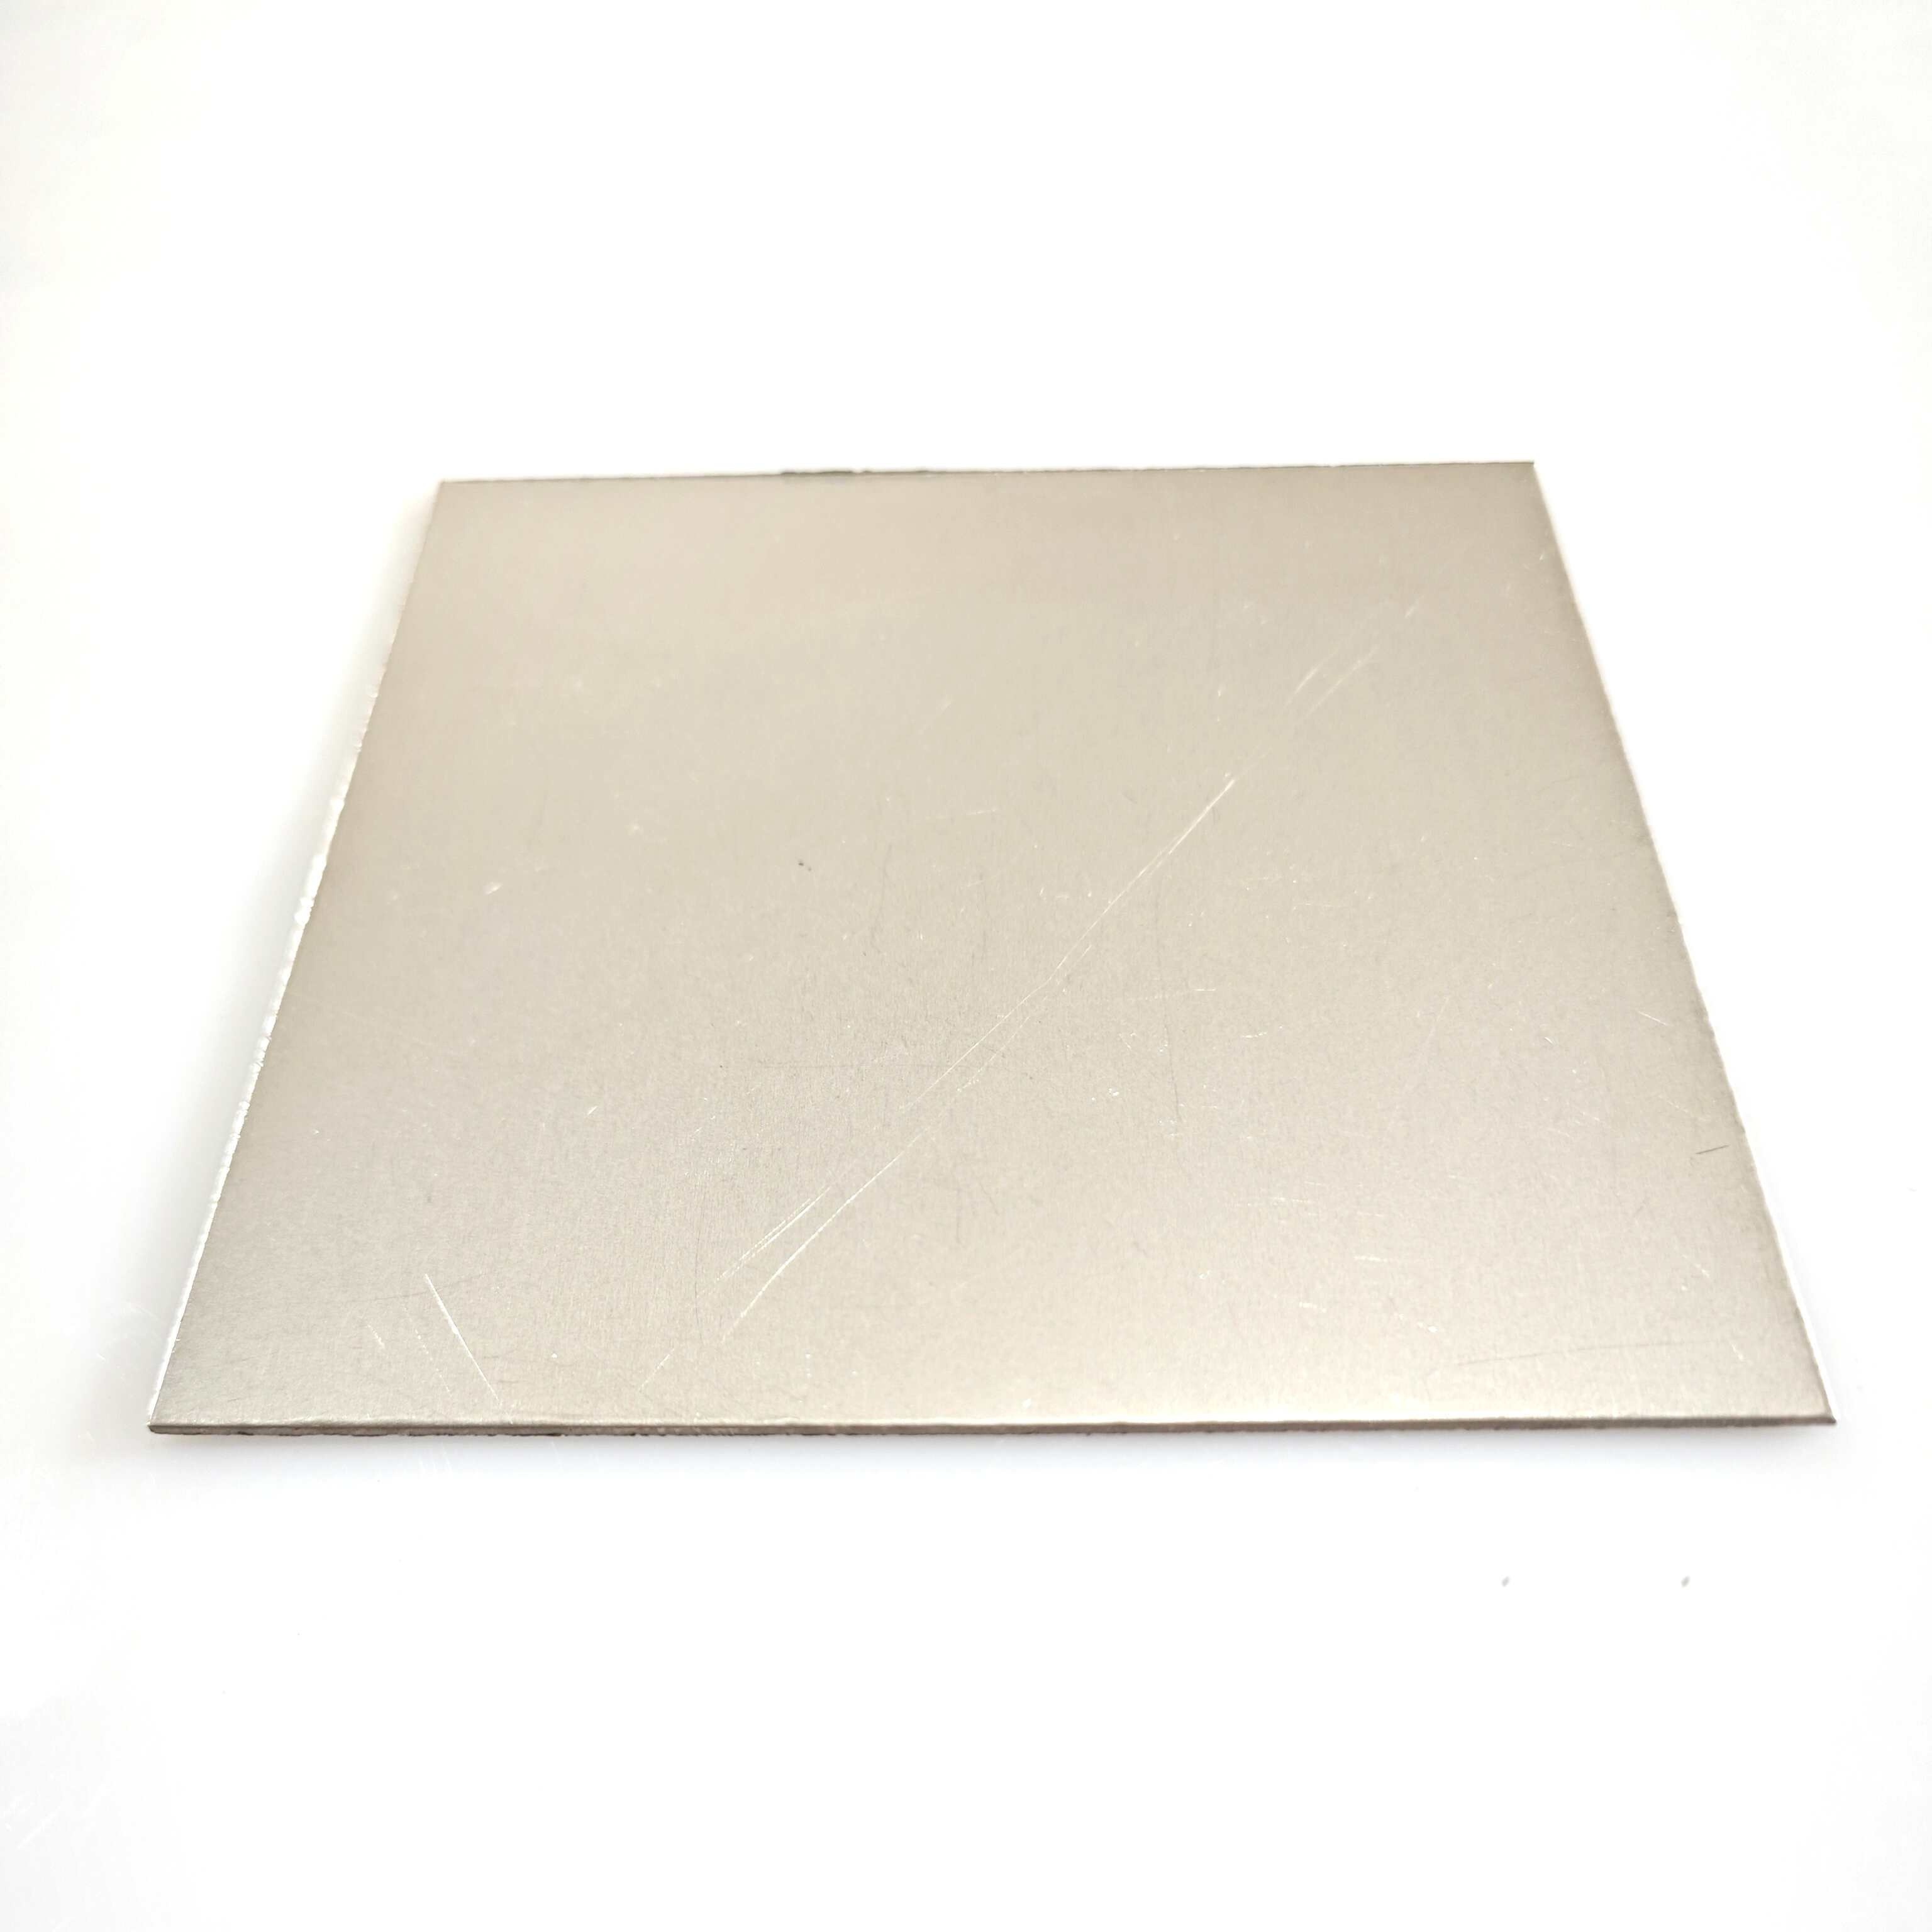 99.9% Pure Copper Plate 0.8-4mm Thick Metal Sheet Art DIY Crafts Model  Material